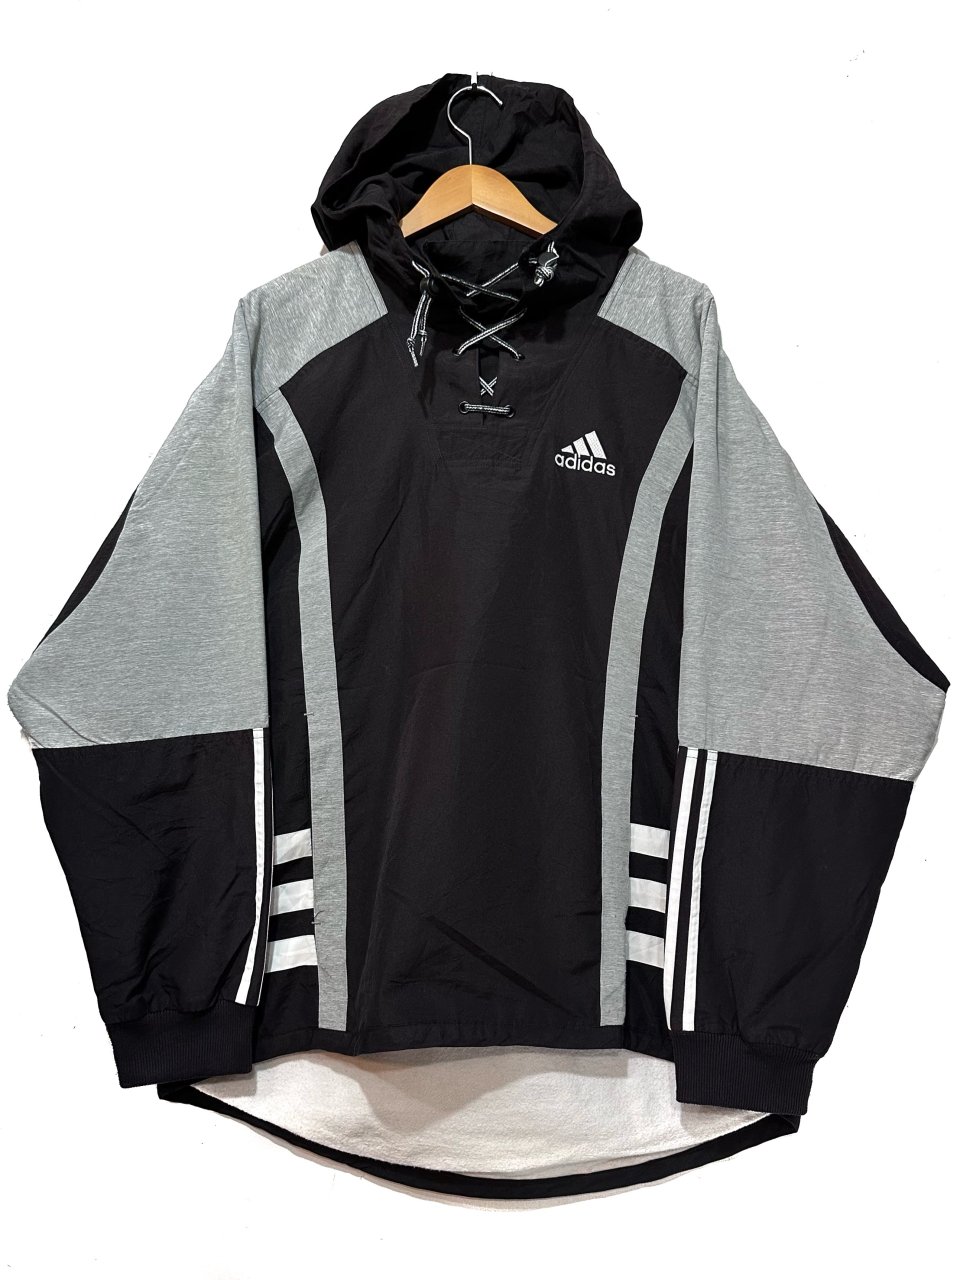 90s adidas Lace Up Pullover Hoodie 黒灰 L アディダス ナイロン 